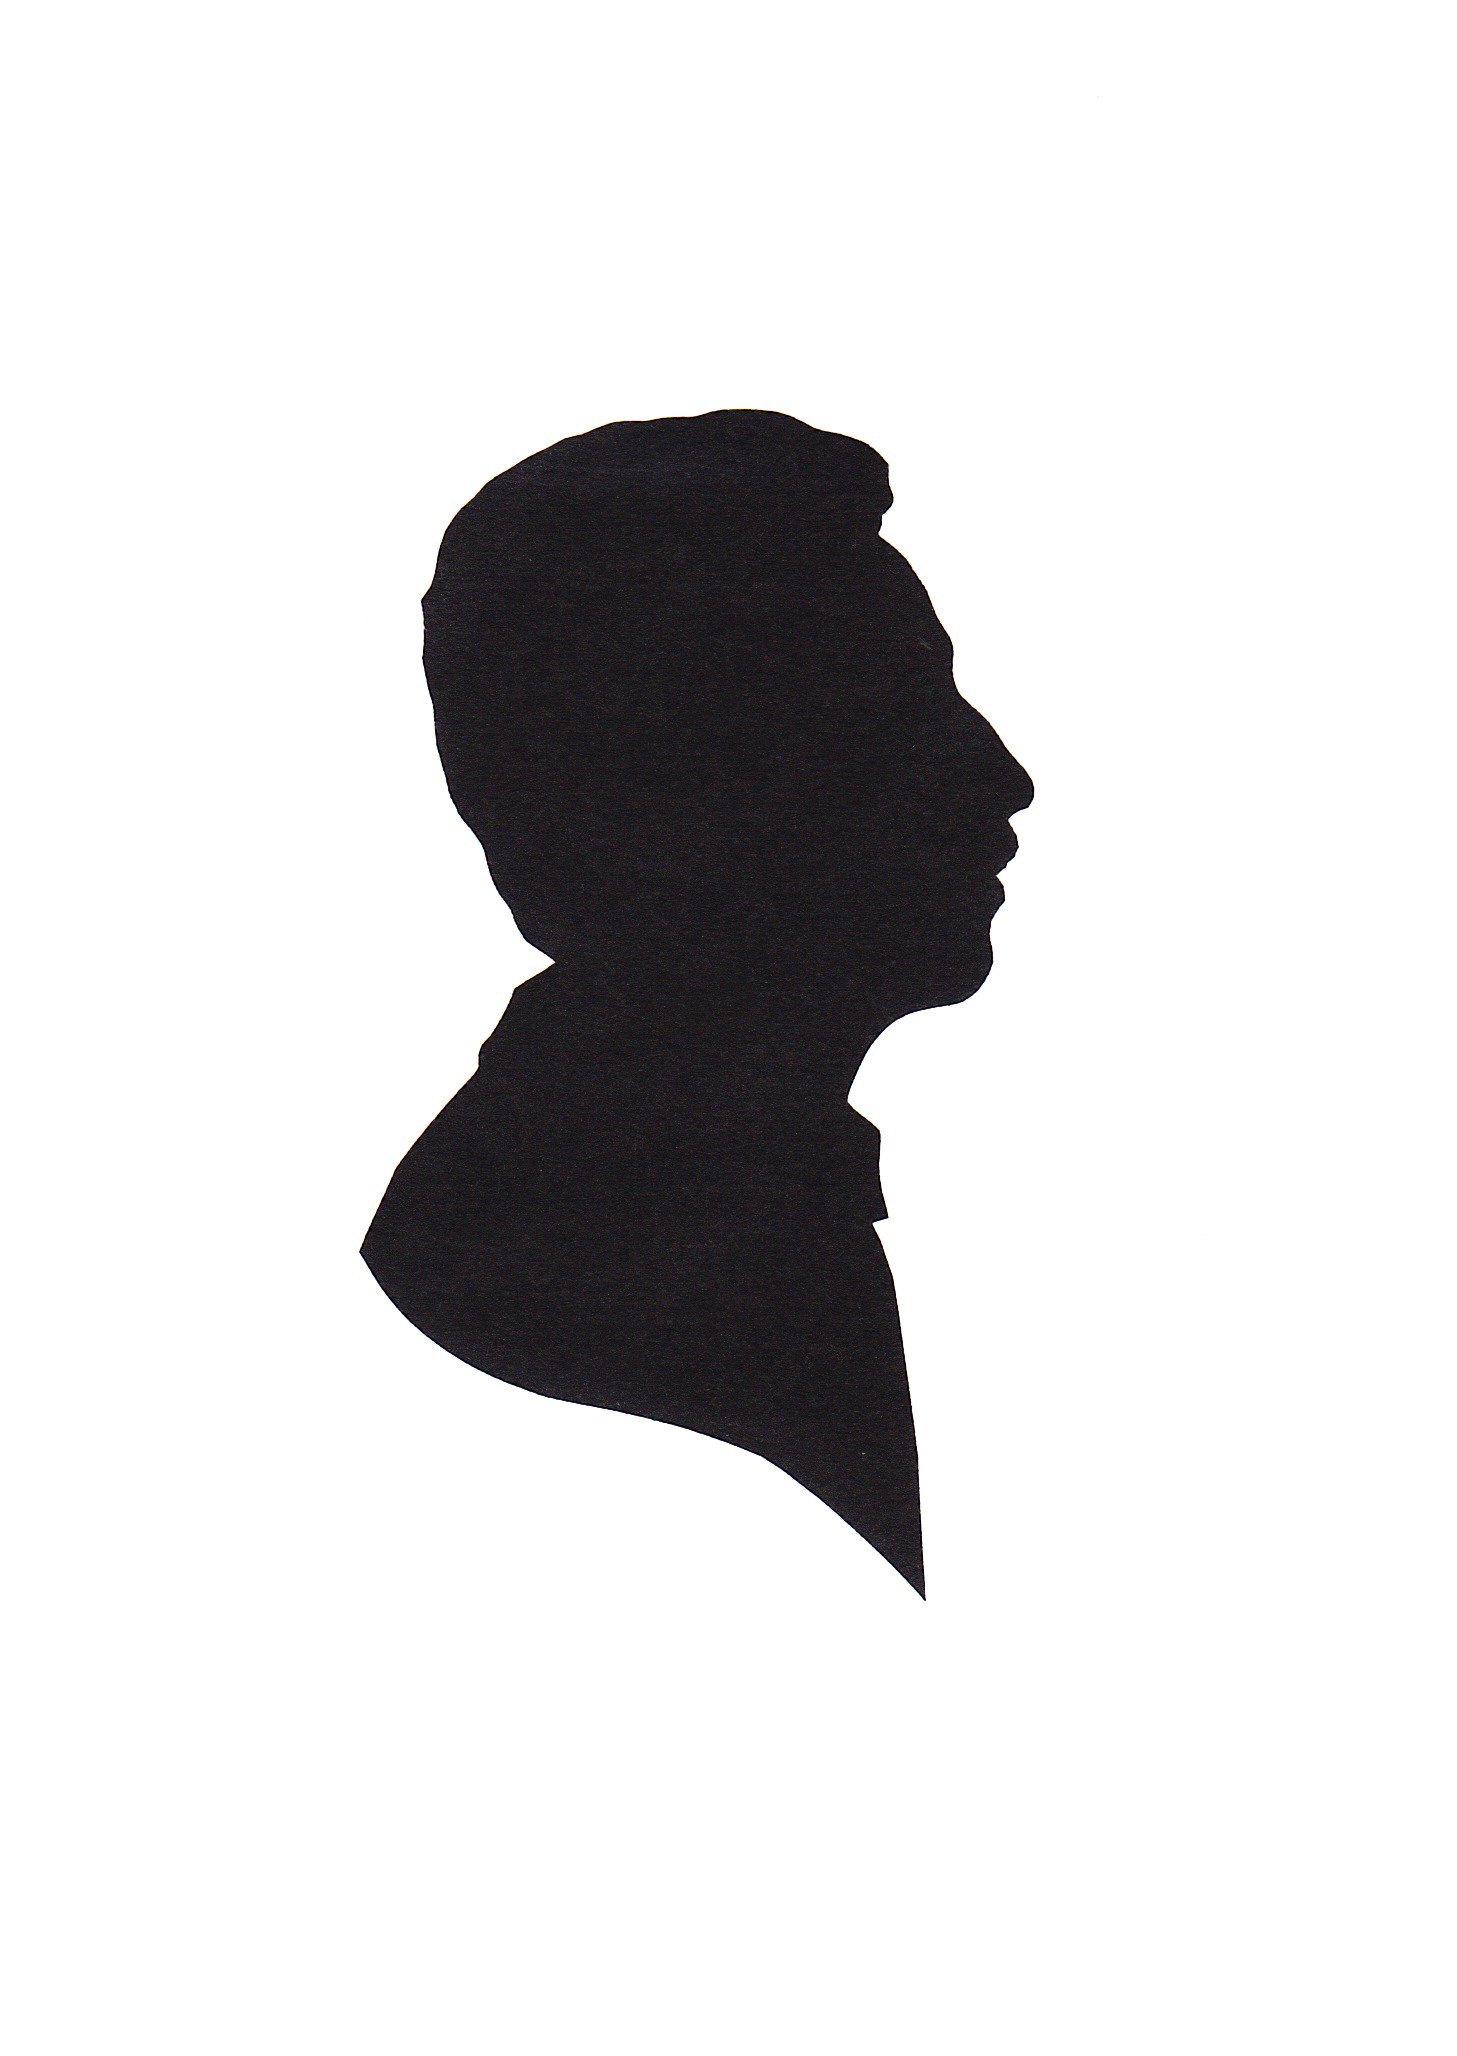 freehand silhouette portraits - a set on Flickr